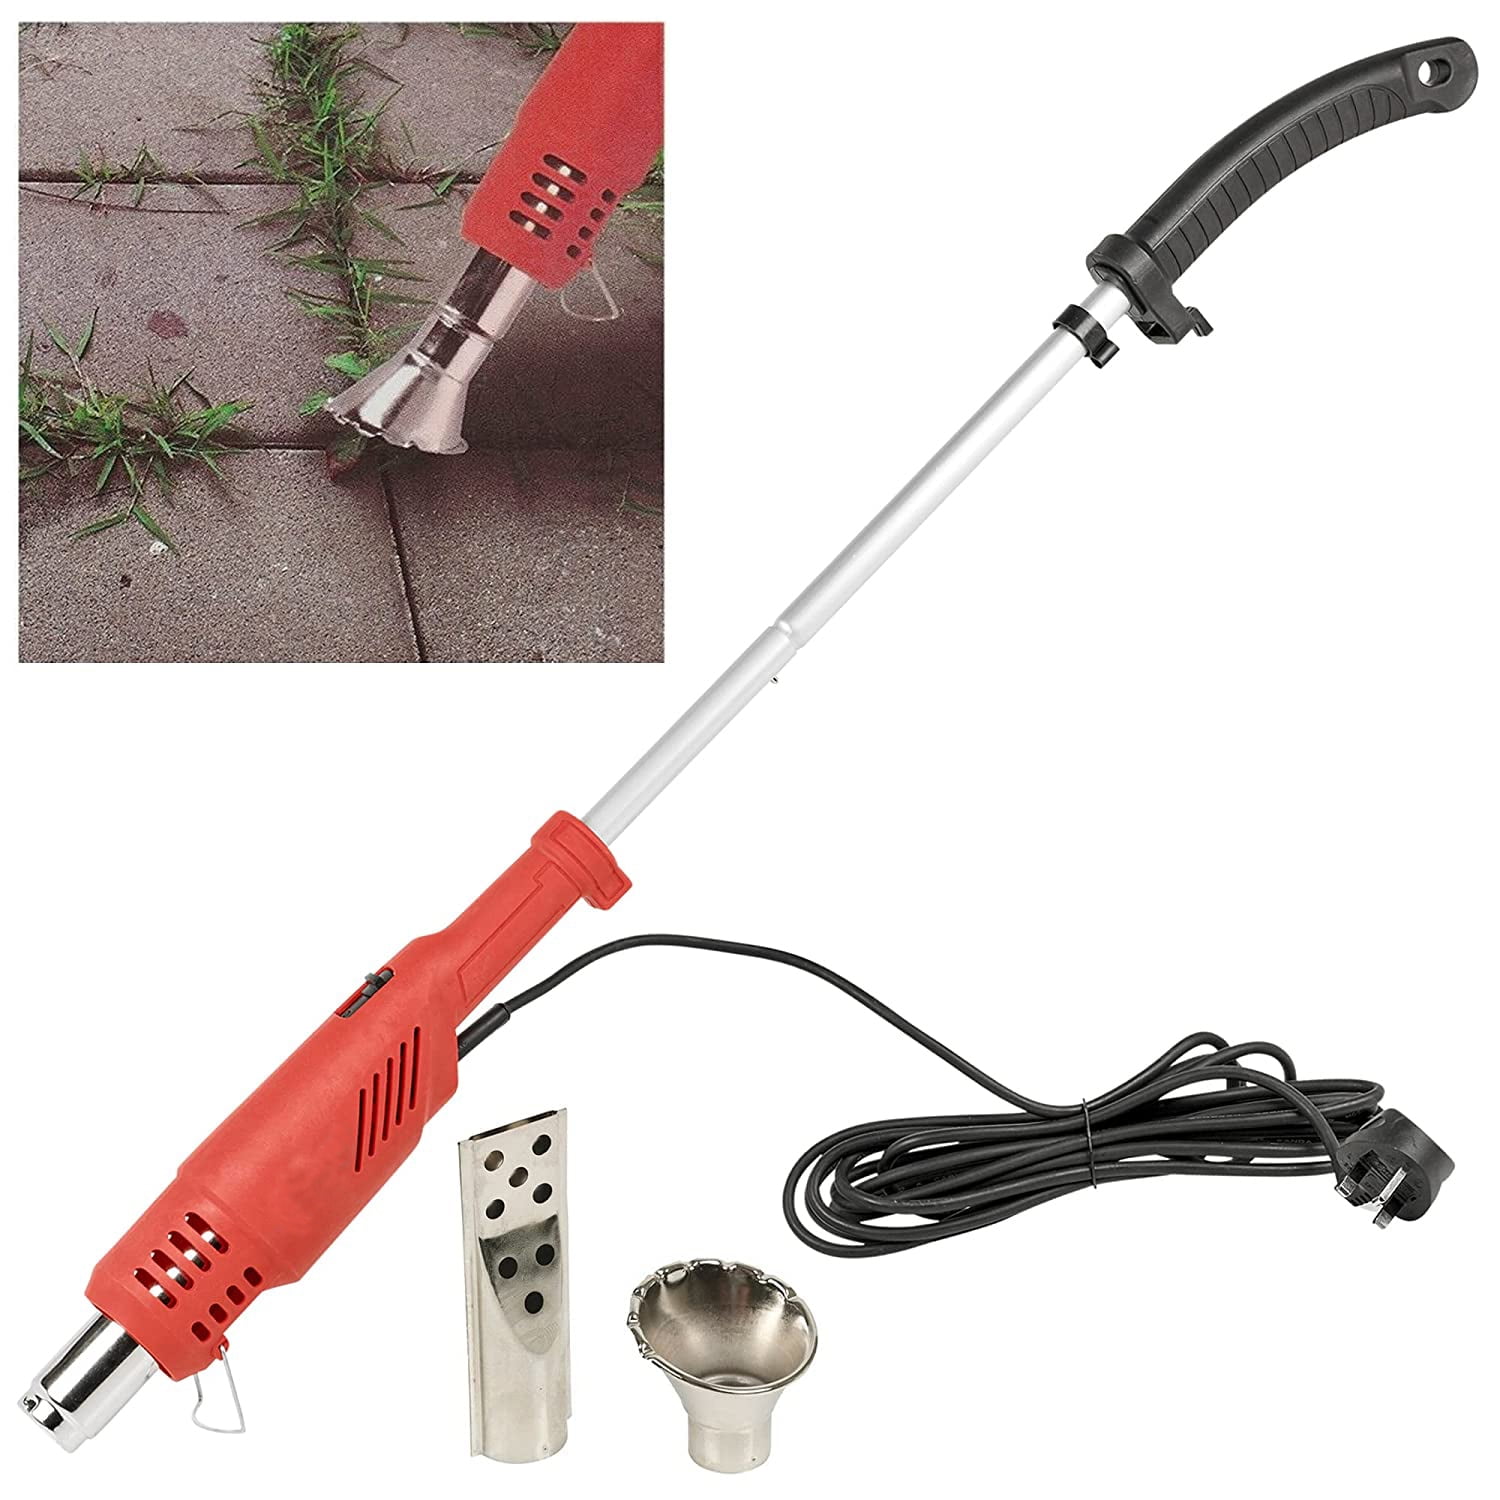 BBQ Fan Air Blower Electric Thermal Weeder for Garden Weed Burner BBQ Electric grass burning machine Patio 2000W Electric Weed Burner Driveway with 2 Nozzles Up to 650°C 